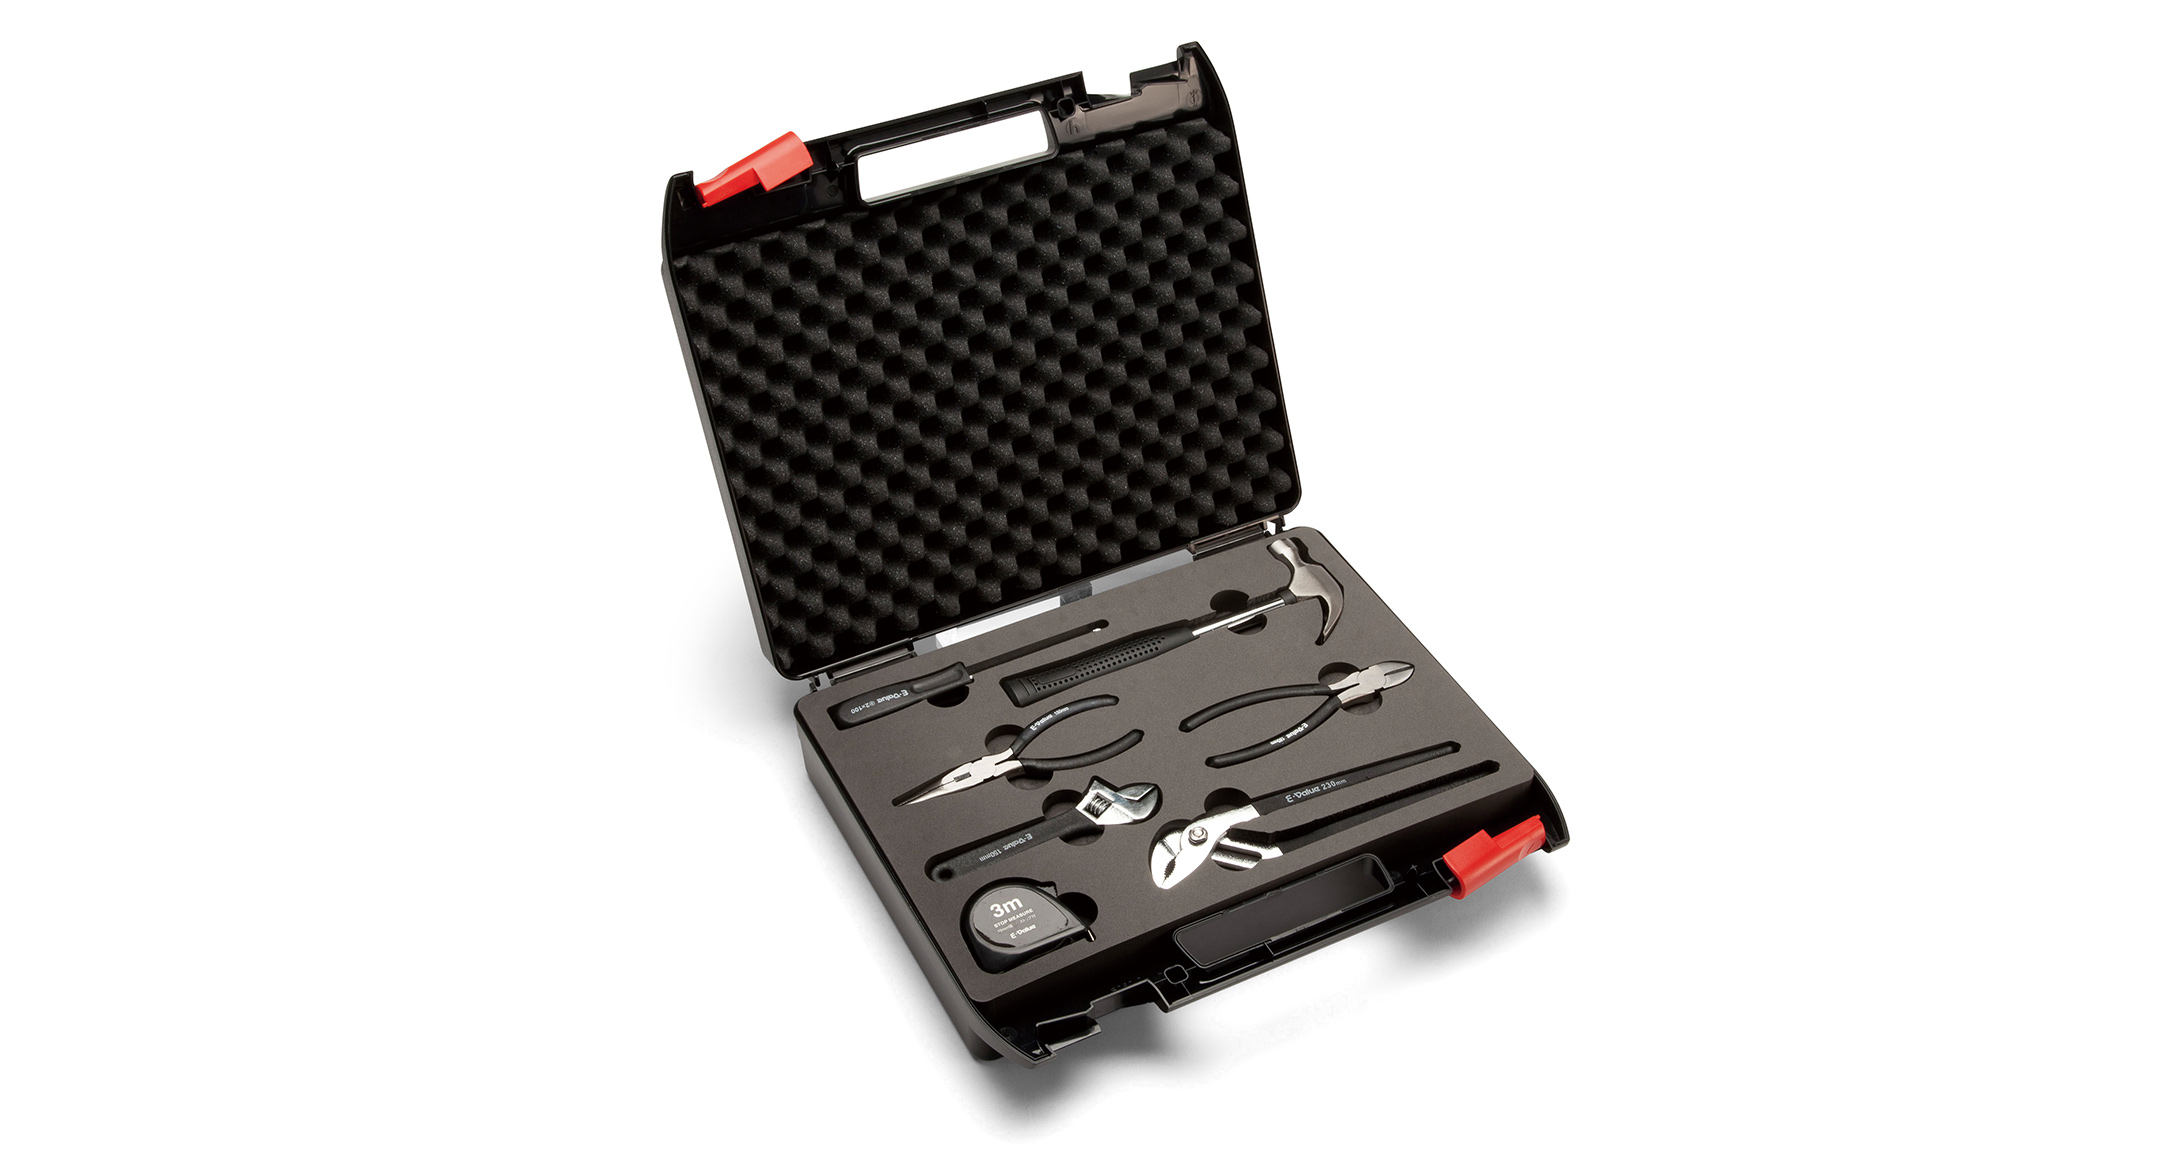 PLASTIC CARRYING CASE - MAXI series